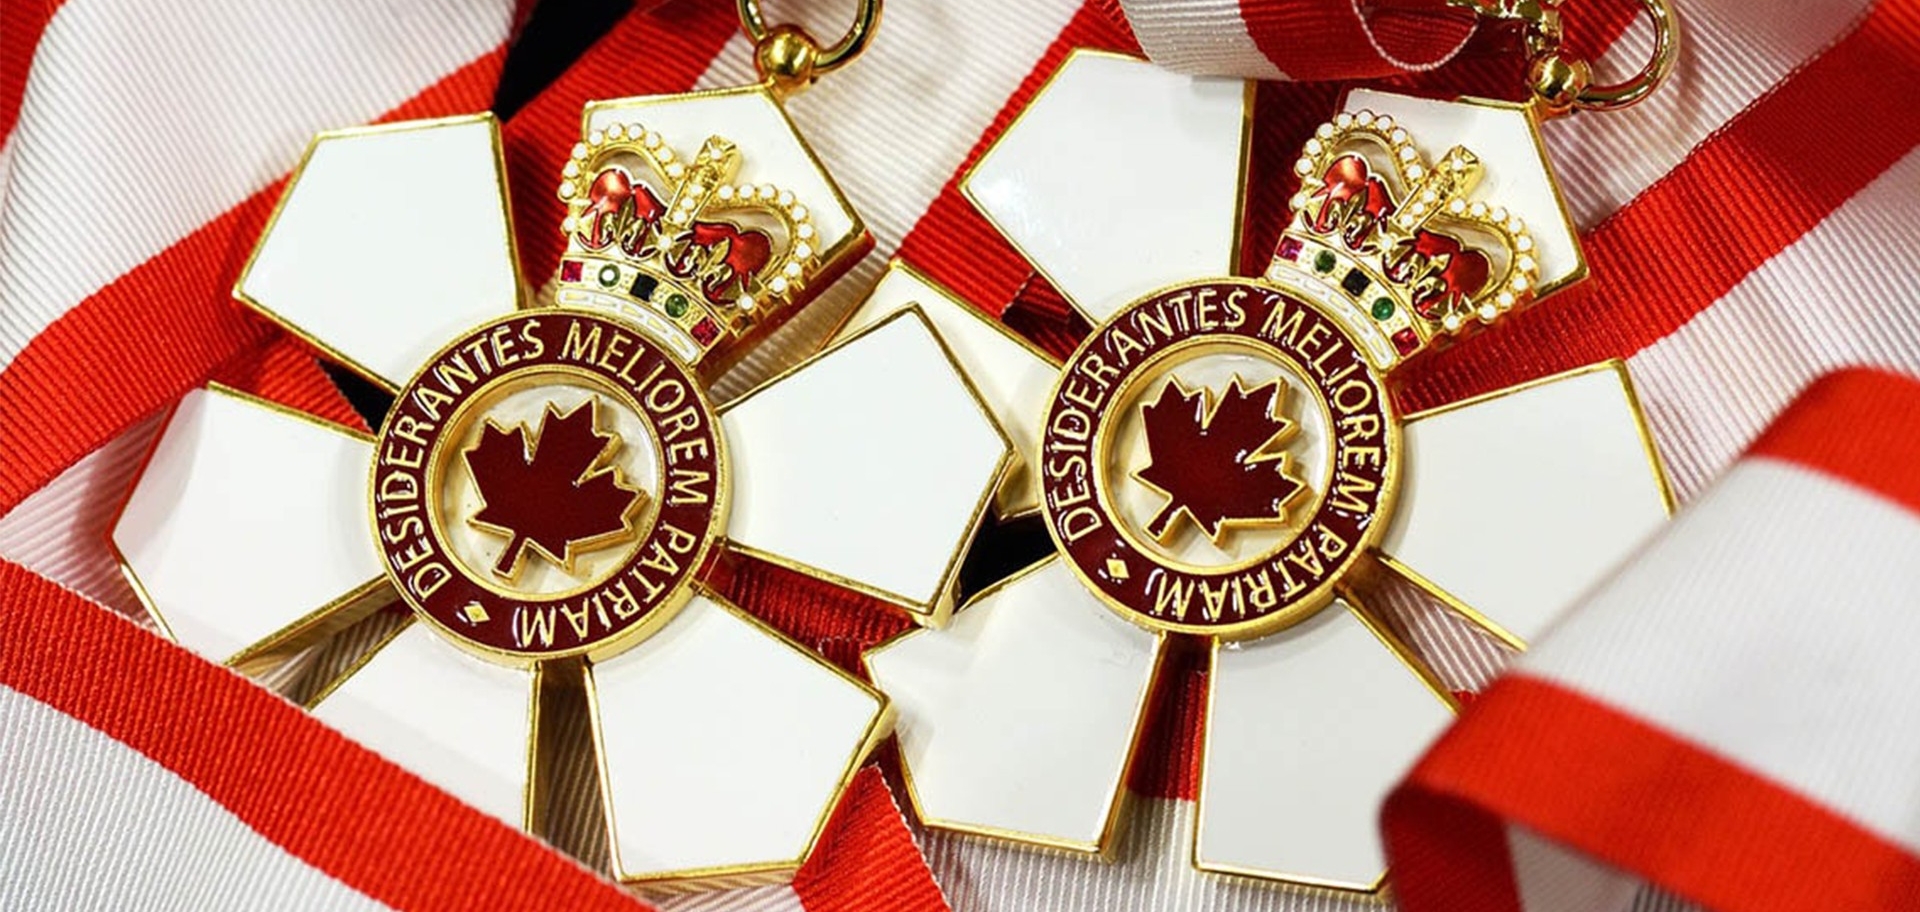 Two six-petaled white medals with maple leaf at the centre and a crown at the top end, attached to red and white ribbons